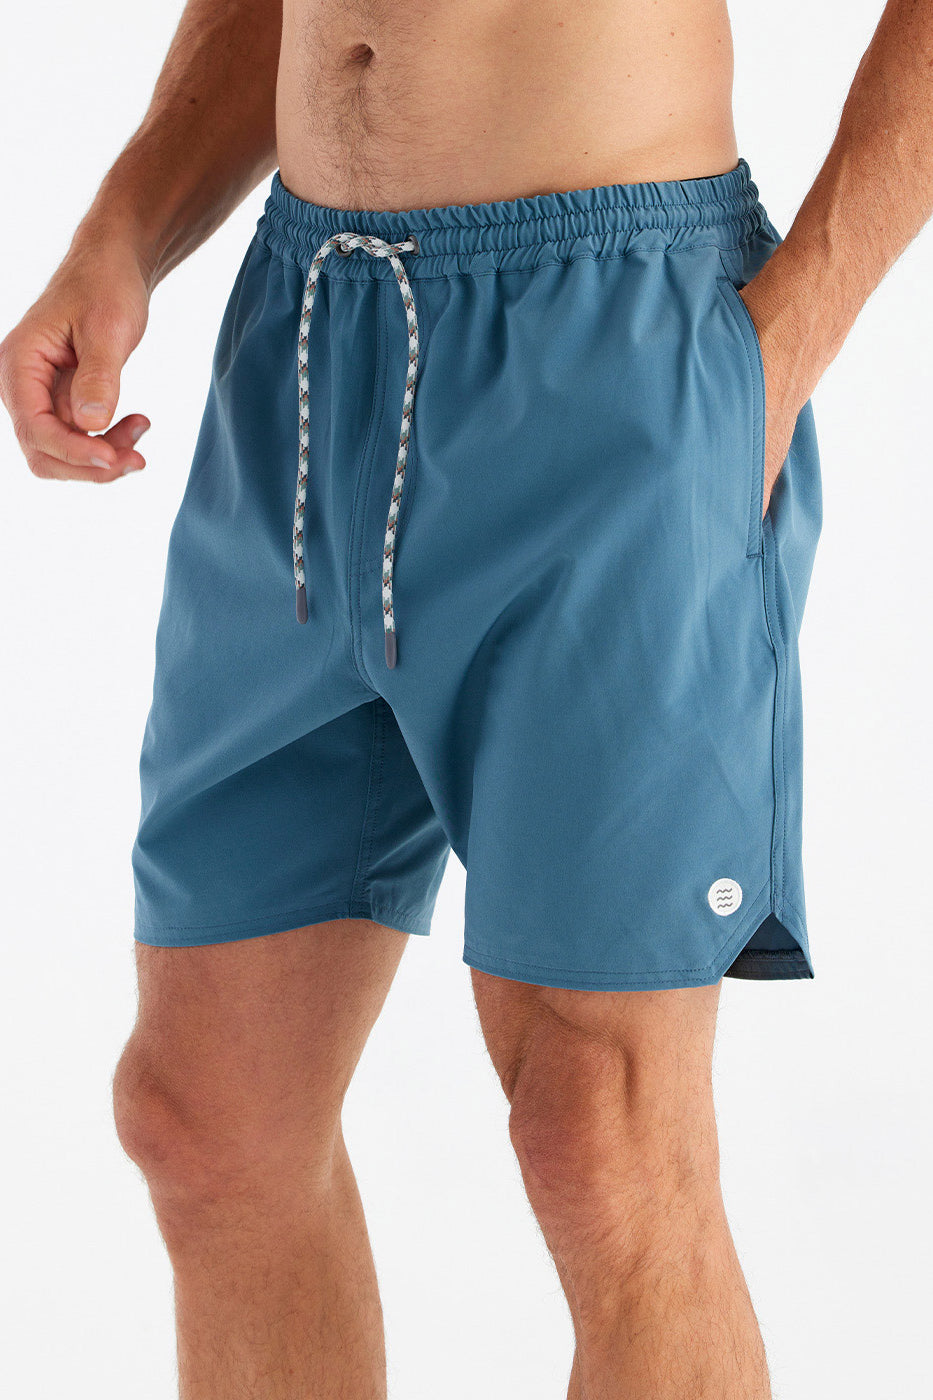 Free Fly: Men's Andros Trunk